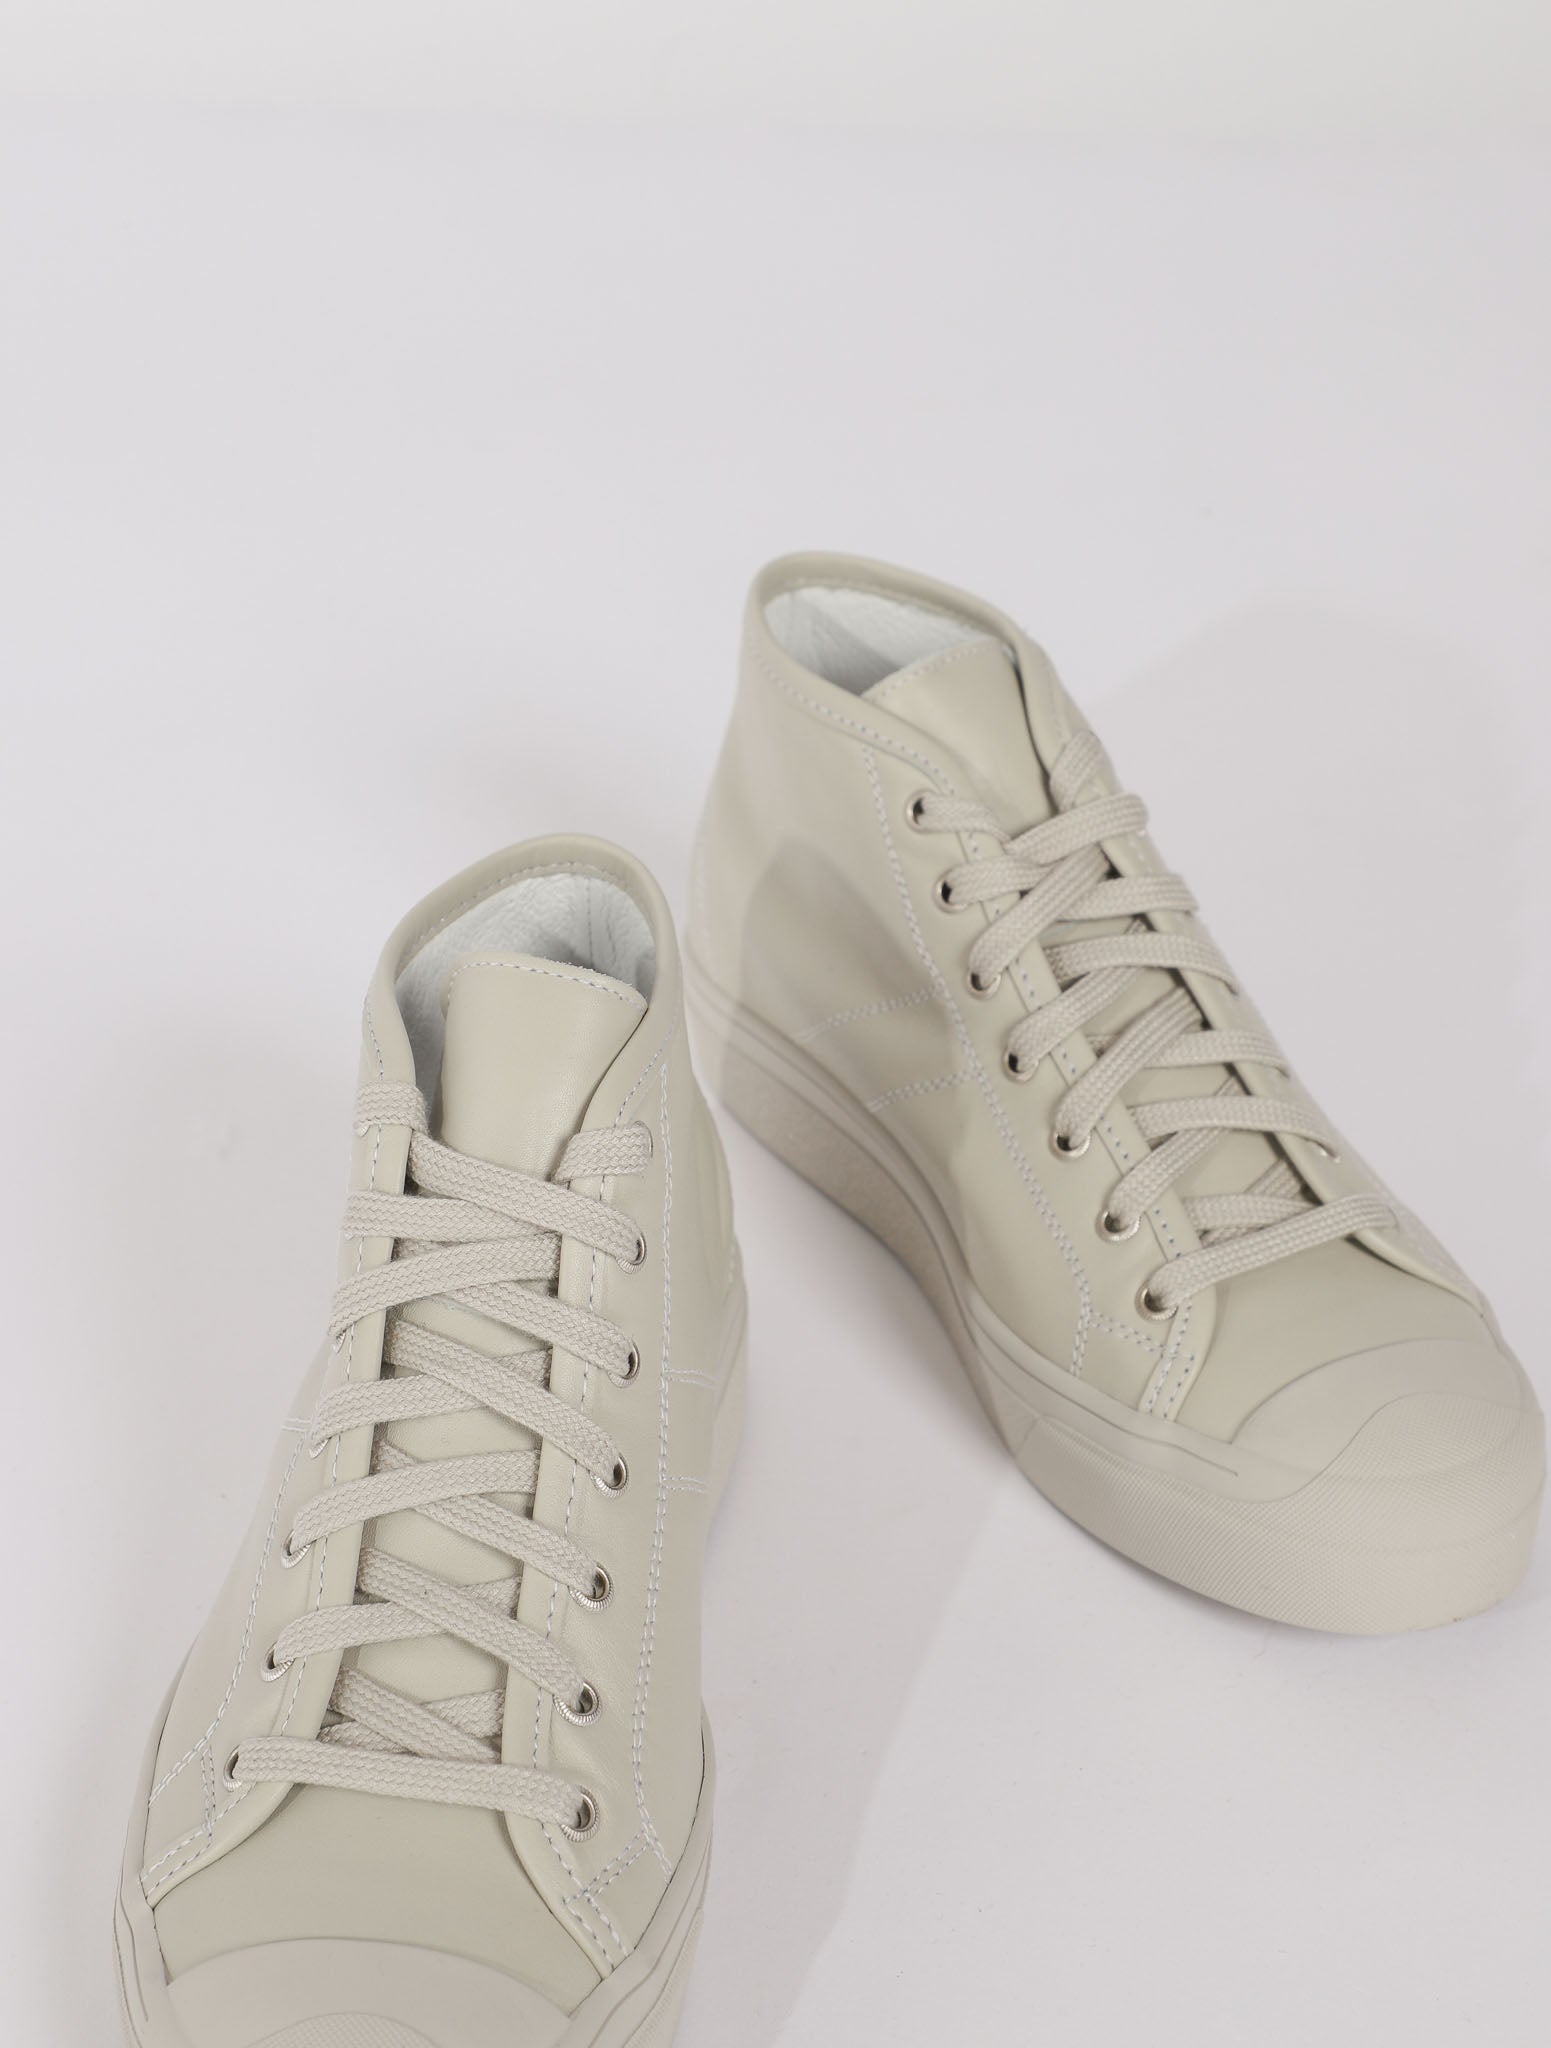 Foster High Top Sneakers